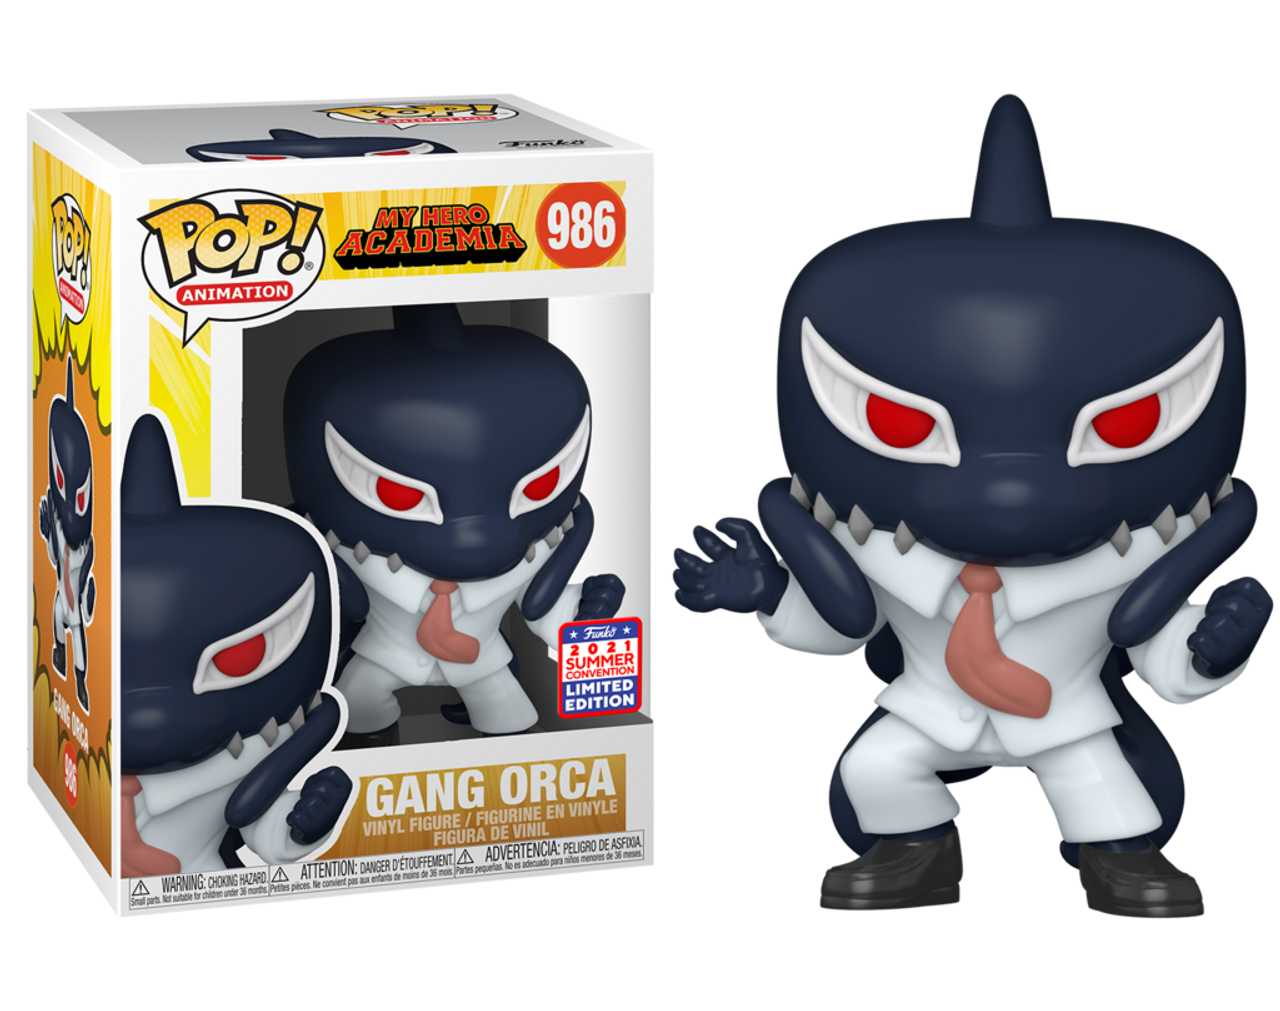 Gang Orca My Hero Academia 986 Funko PoP! 2021 Summer Convention Limited Edition + PoP Protector